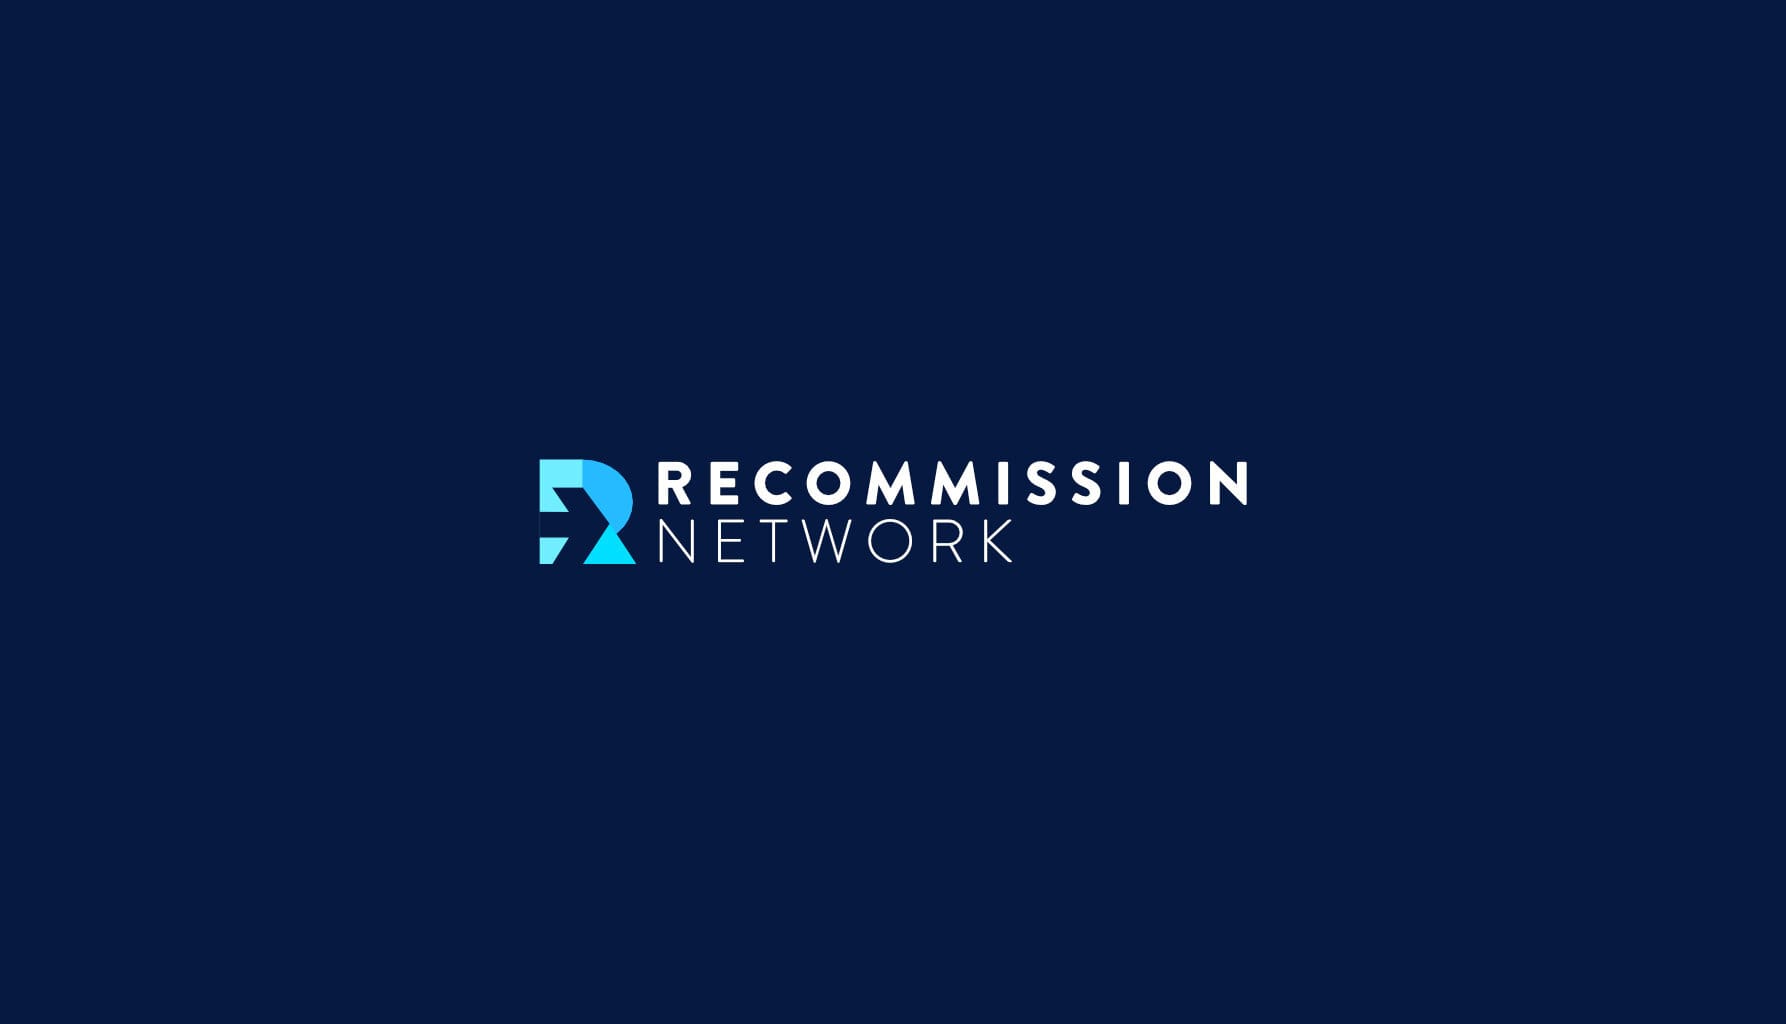 NAMB and The Recommission Network